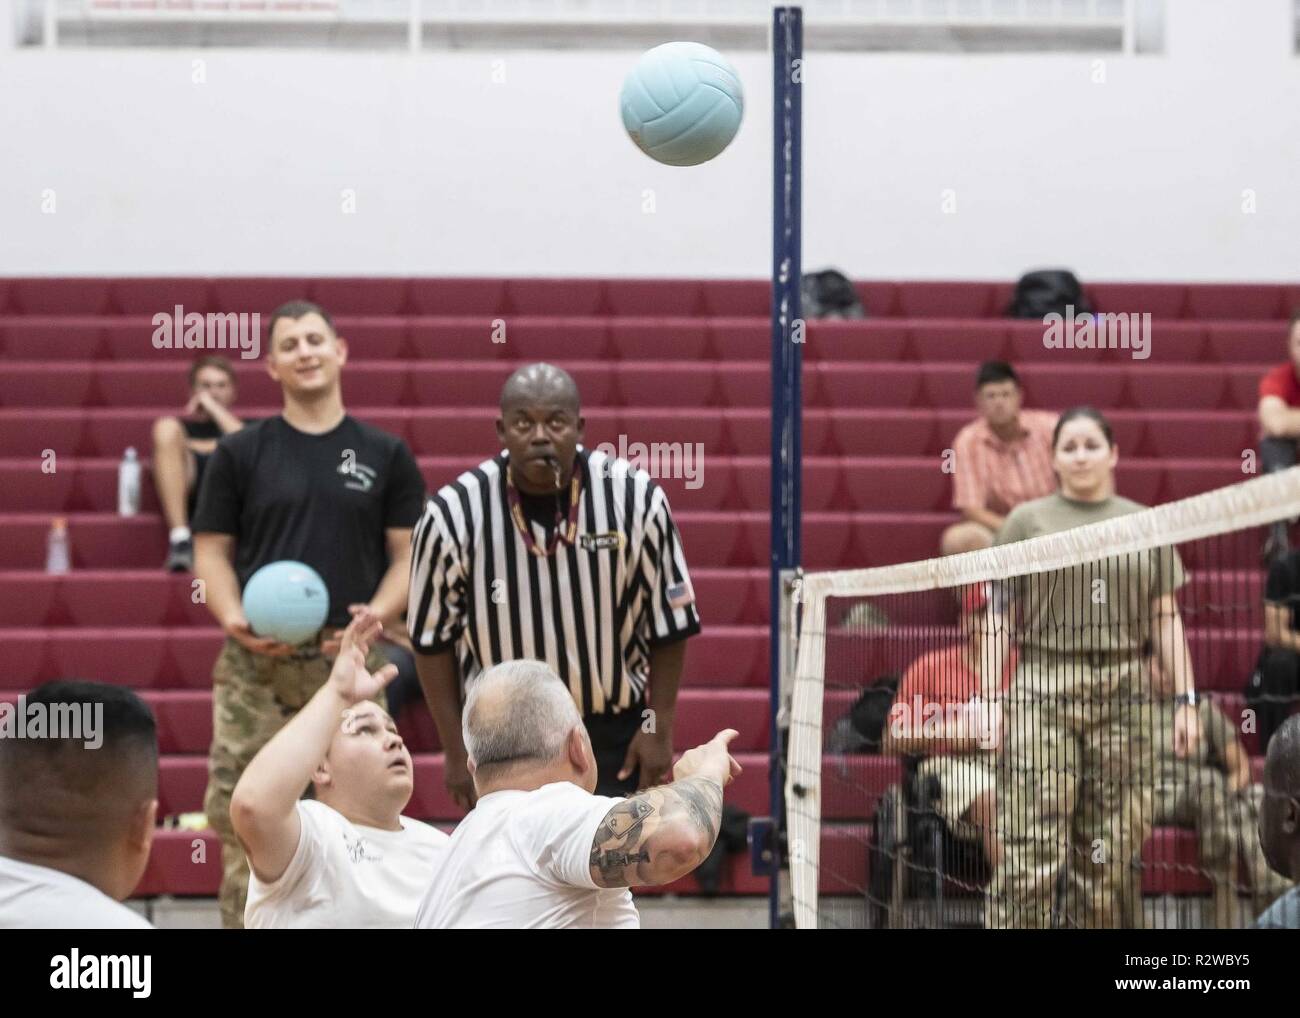 The ball is volleyed across the net as competitors prepare to react during the seated volleyball competition at the Pacific Regional Trails on November 15, 2018 at Schofield Barracks Hawaii. Adaptive reconditioning activities can be an integral part of a Soldier’s Comprehensive Transition Plan and help to build resilience, strengthen Relationships and improve self-confidence. Stock Photo